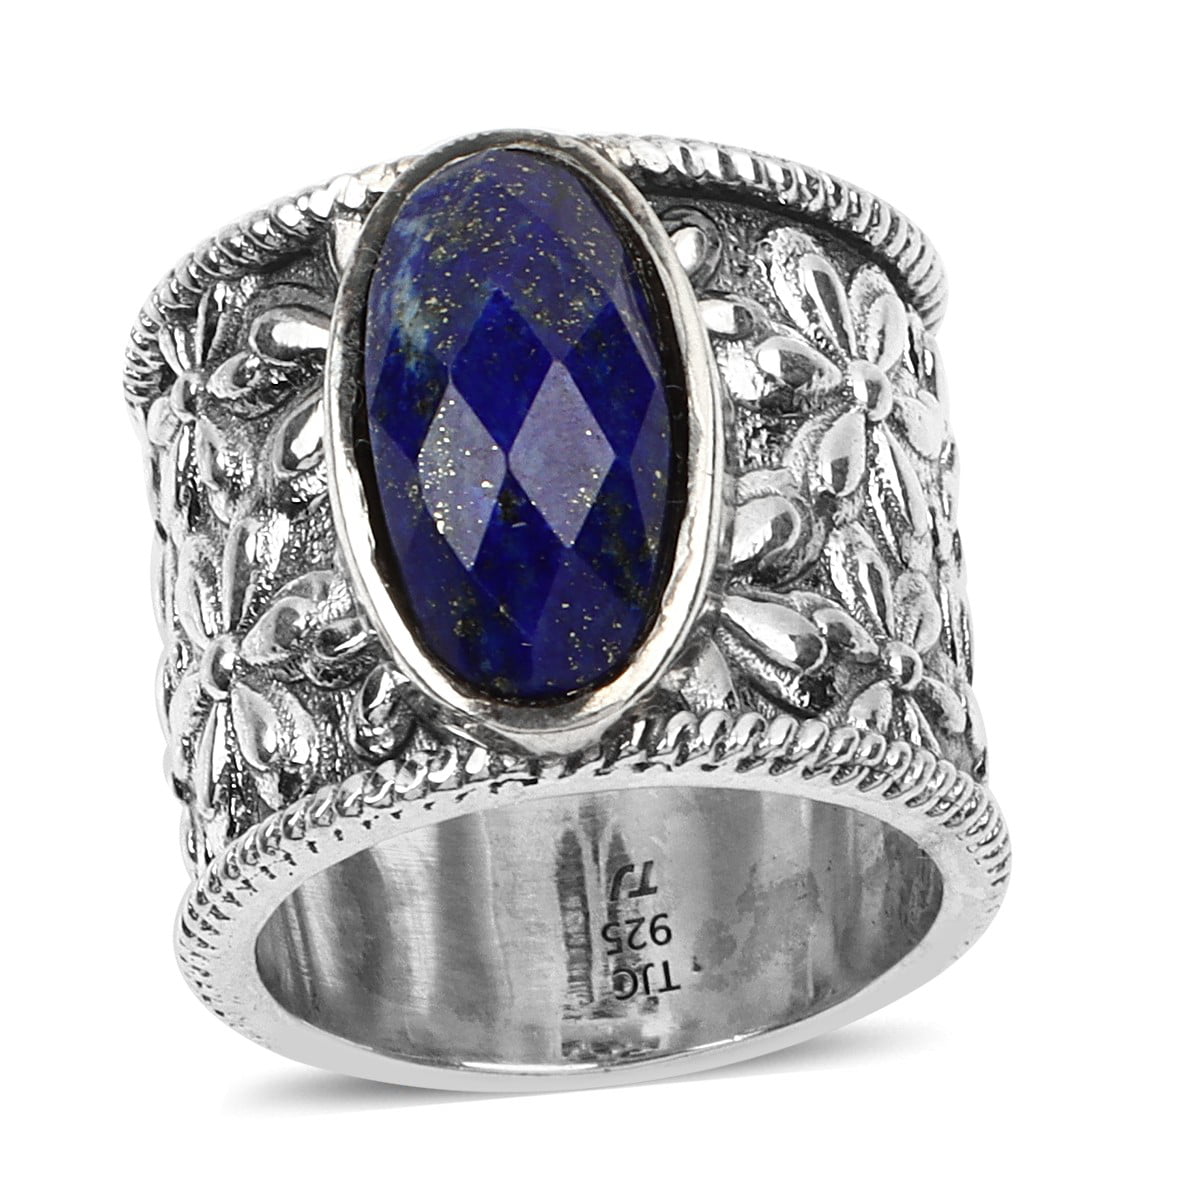 TJC Solitaire Ring for Women in Lapis Lazuli Jewellery